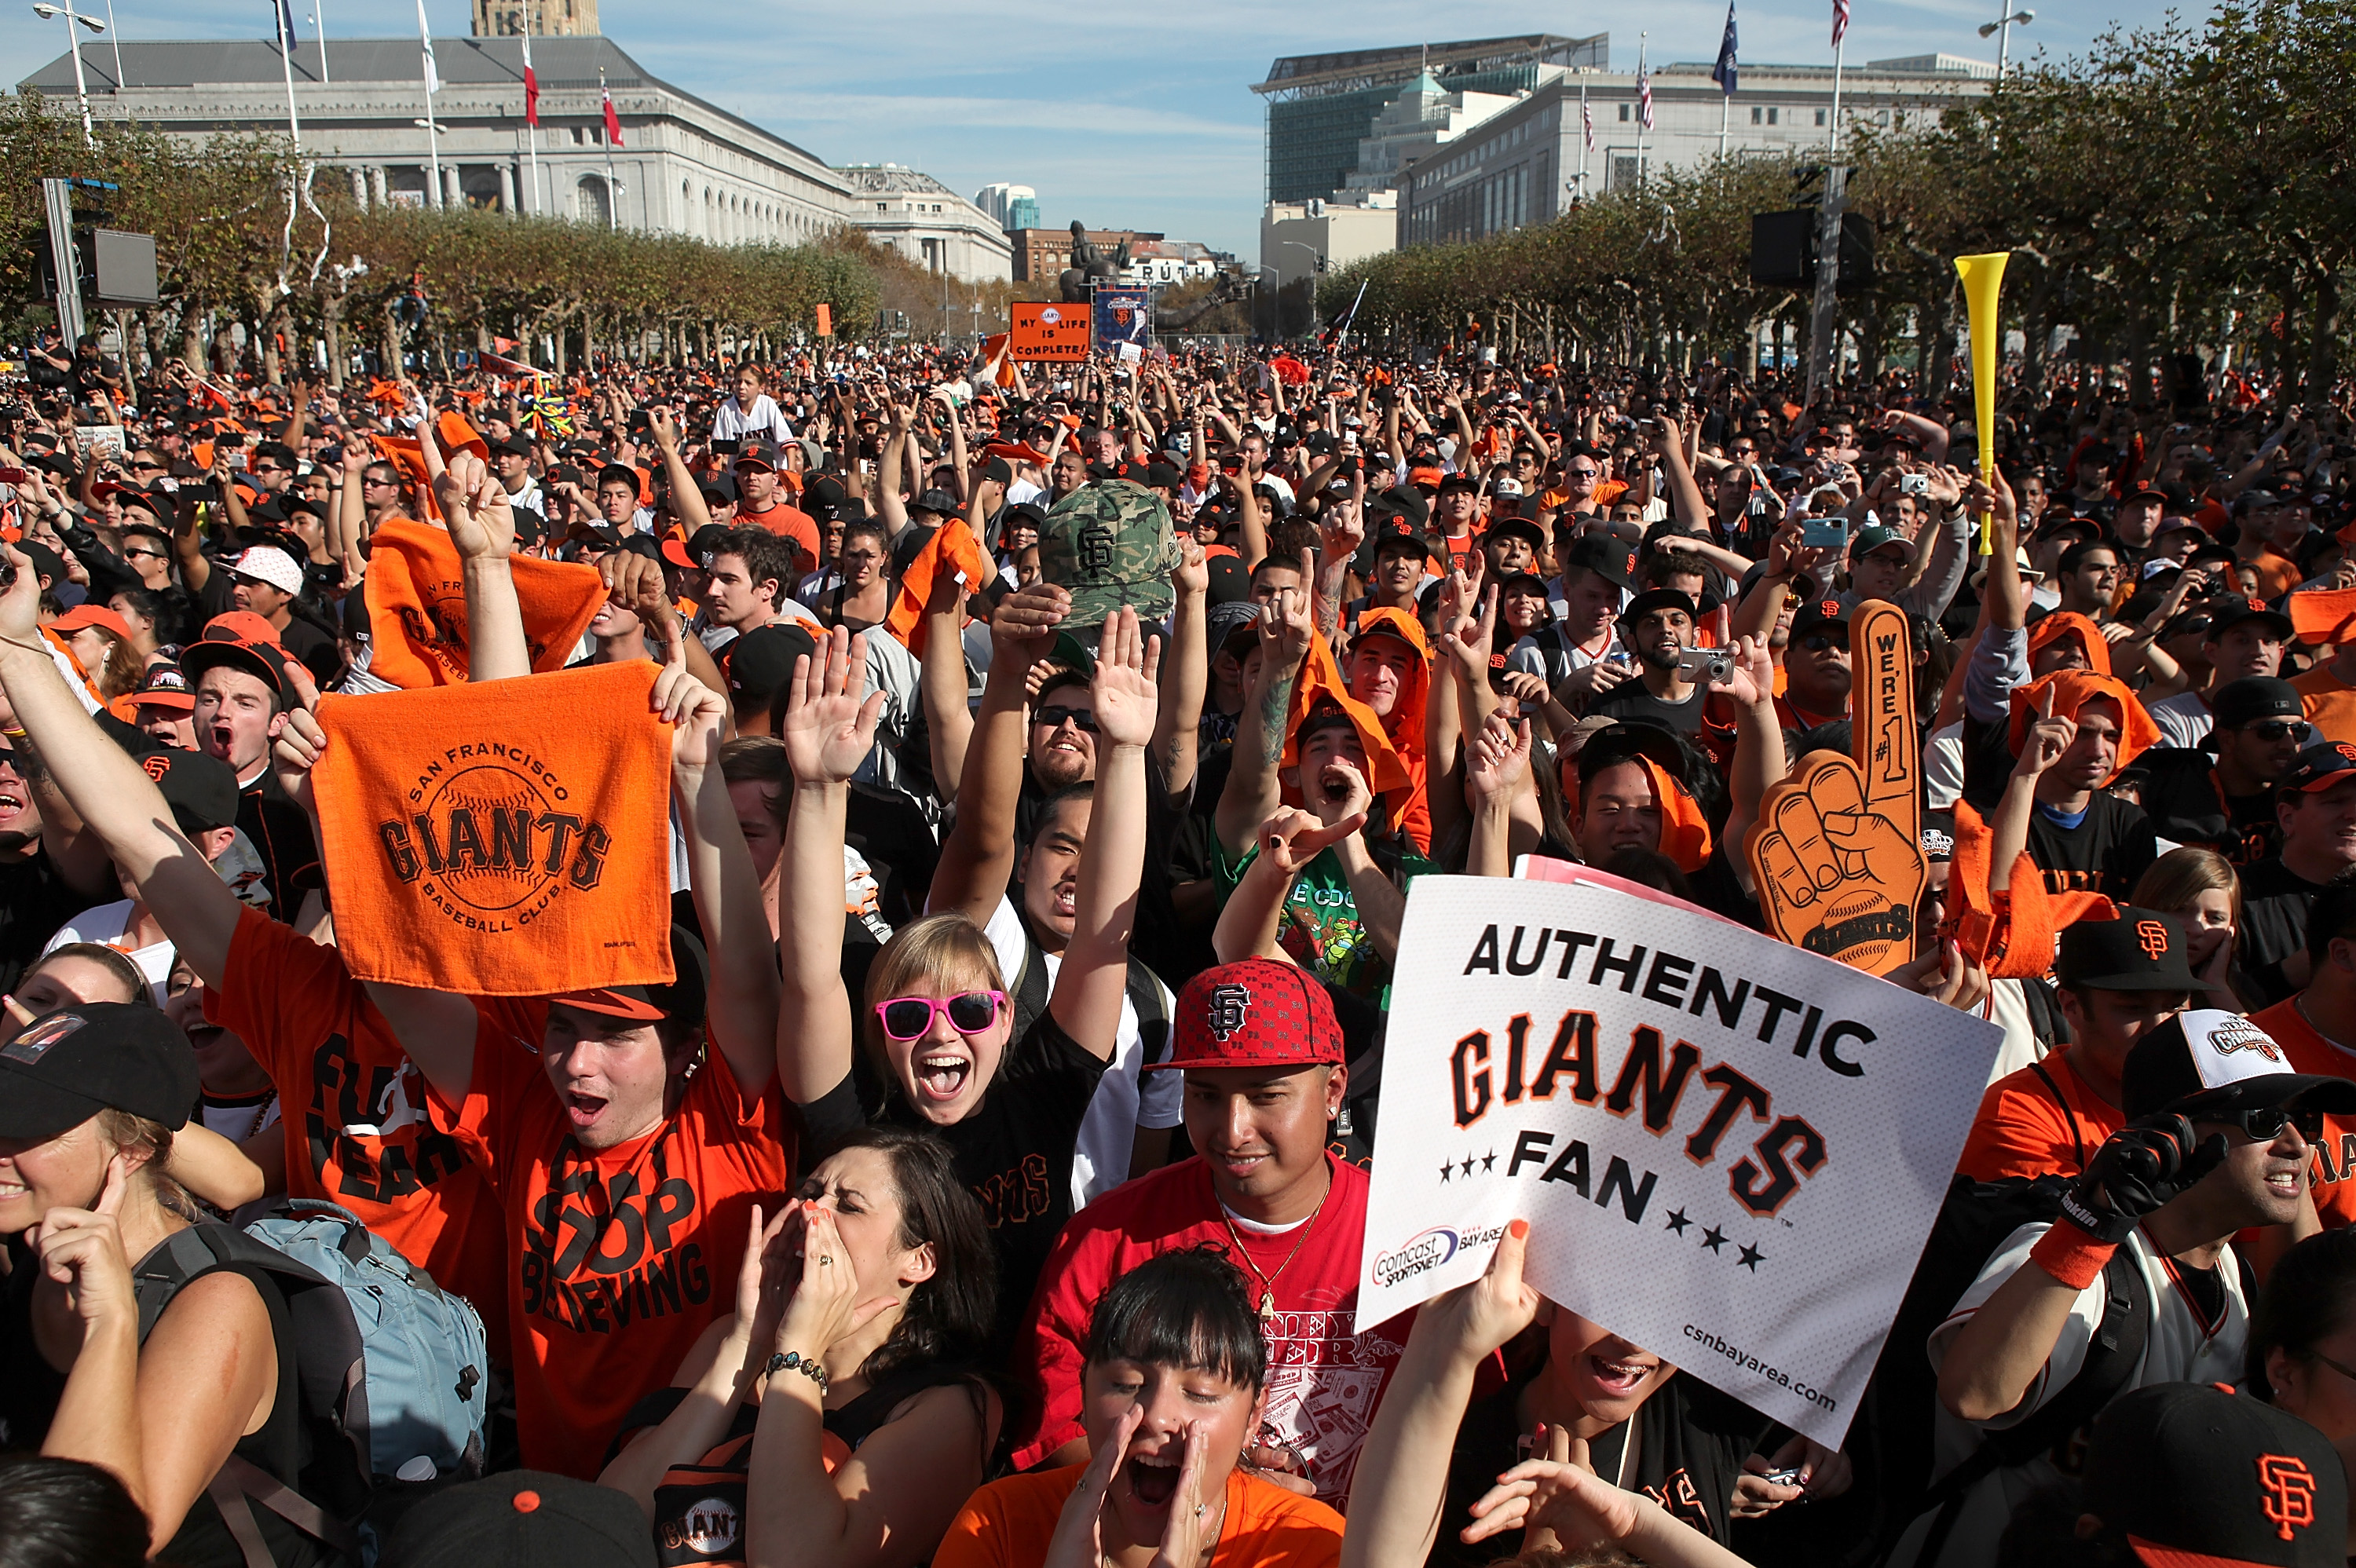 San Francisco Giants fans upset as Cruise becomes official jersey